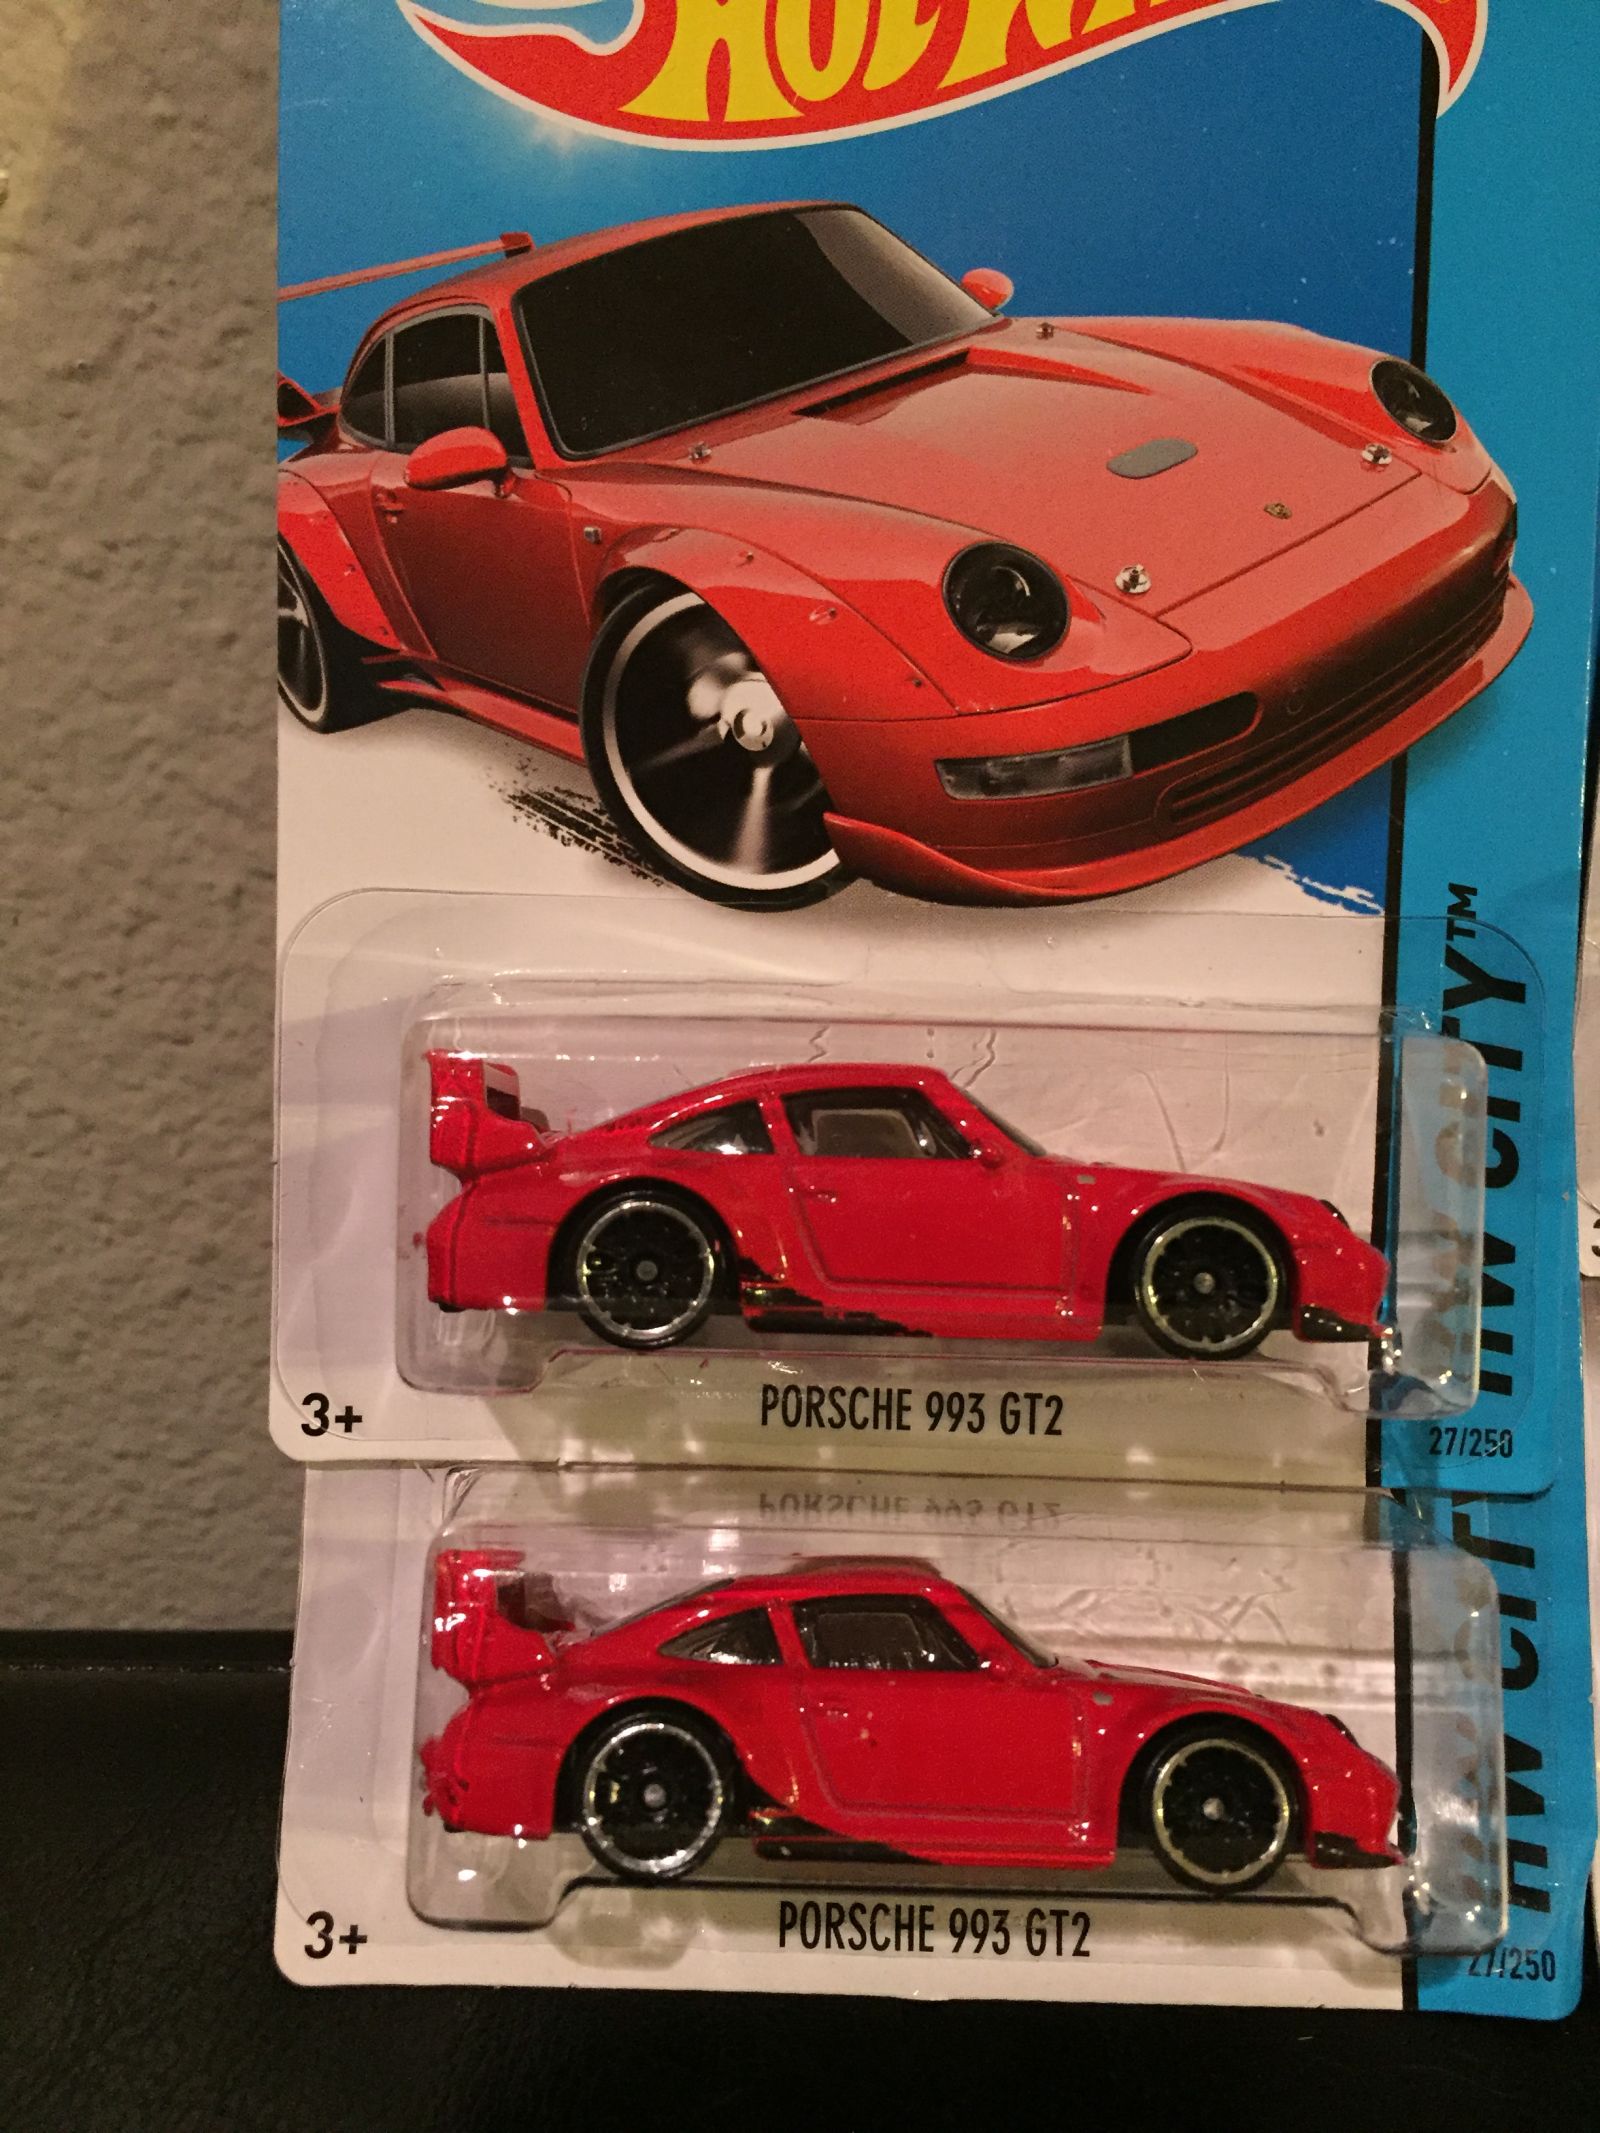 I got these awesome 993 GT2s at the Mattel store